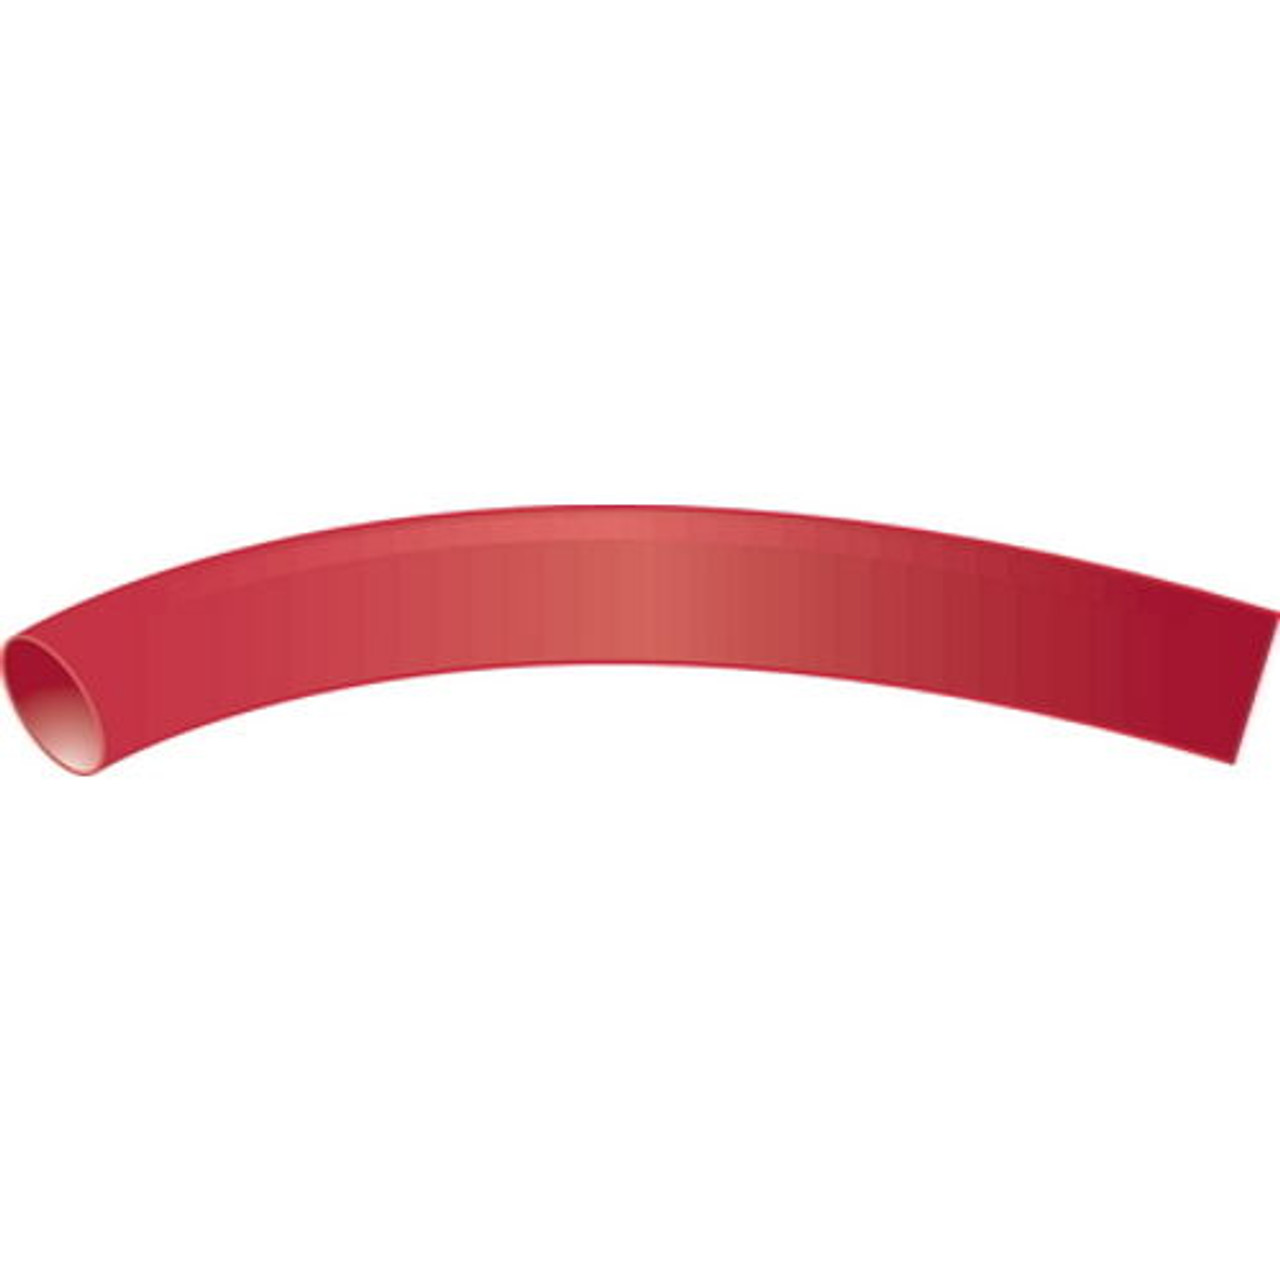 Red 3/16 Inch x 48 Inch 3:1 Heat Shrink Tubing with Sealant for Boats